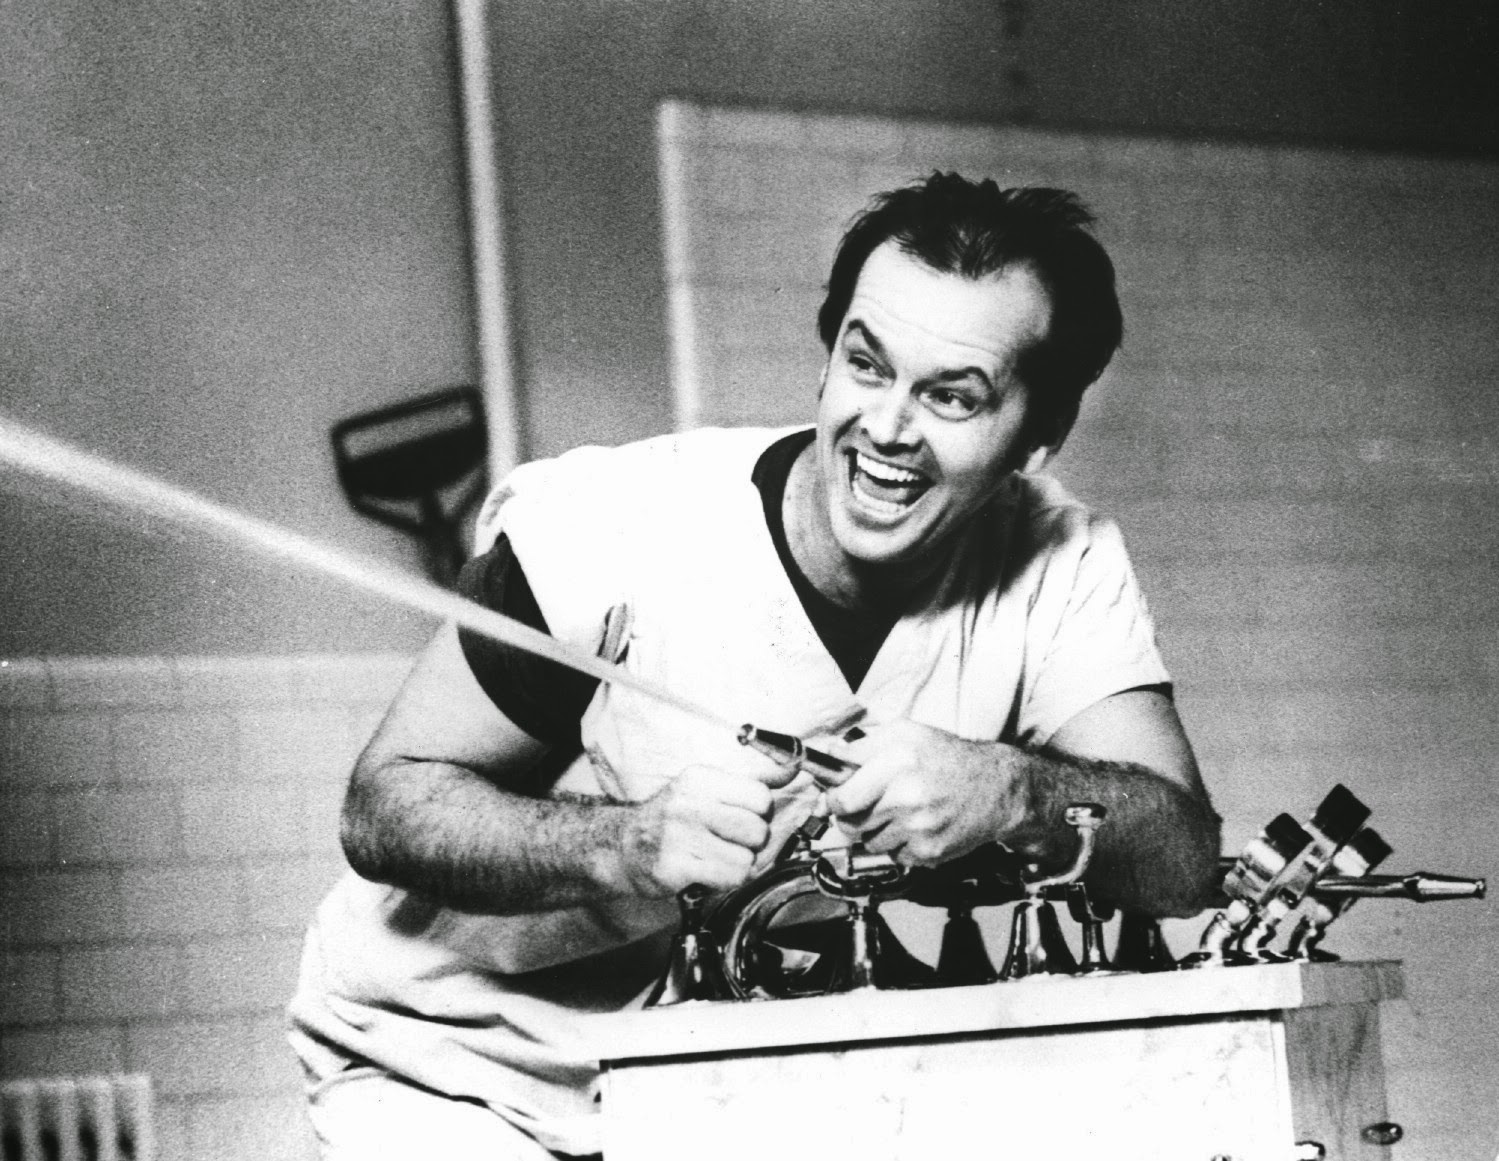 Rare Backstage Photos From “One Flew Over the Cuckoo’s Nest” « Art-Sheep